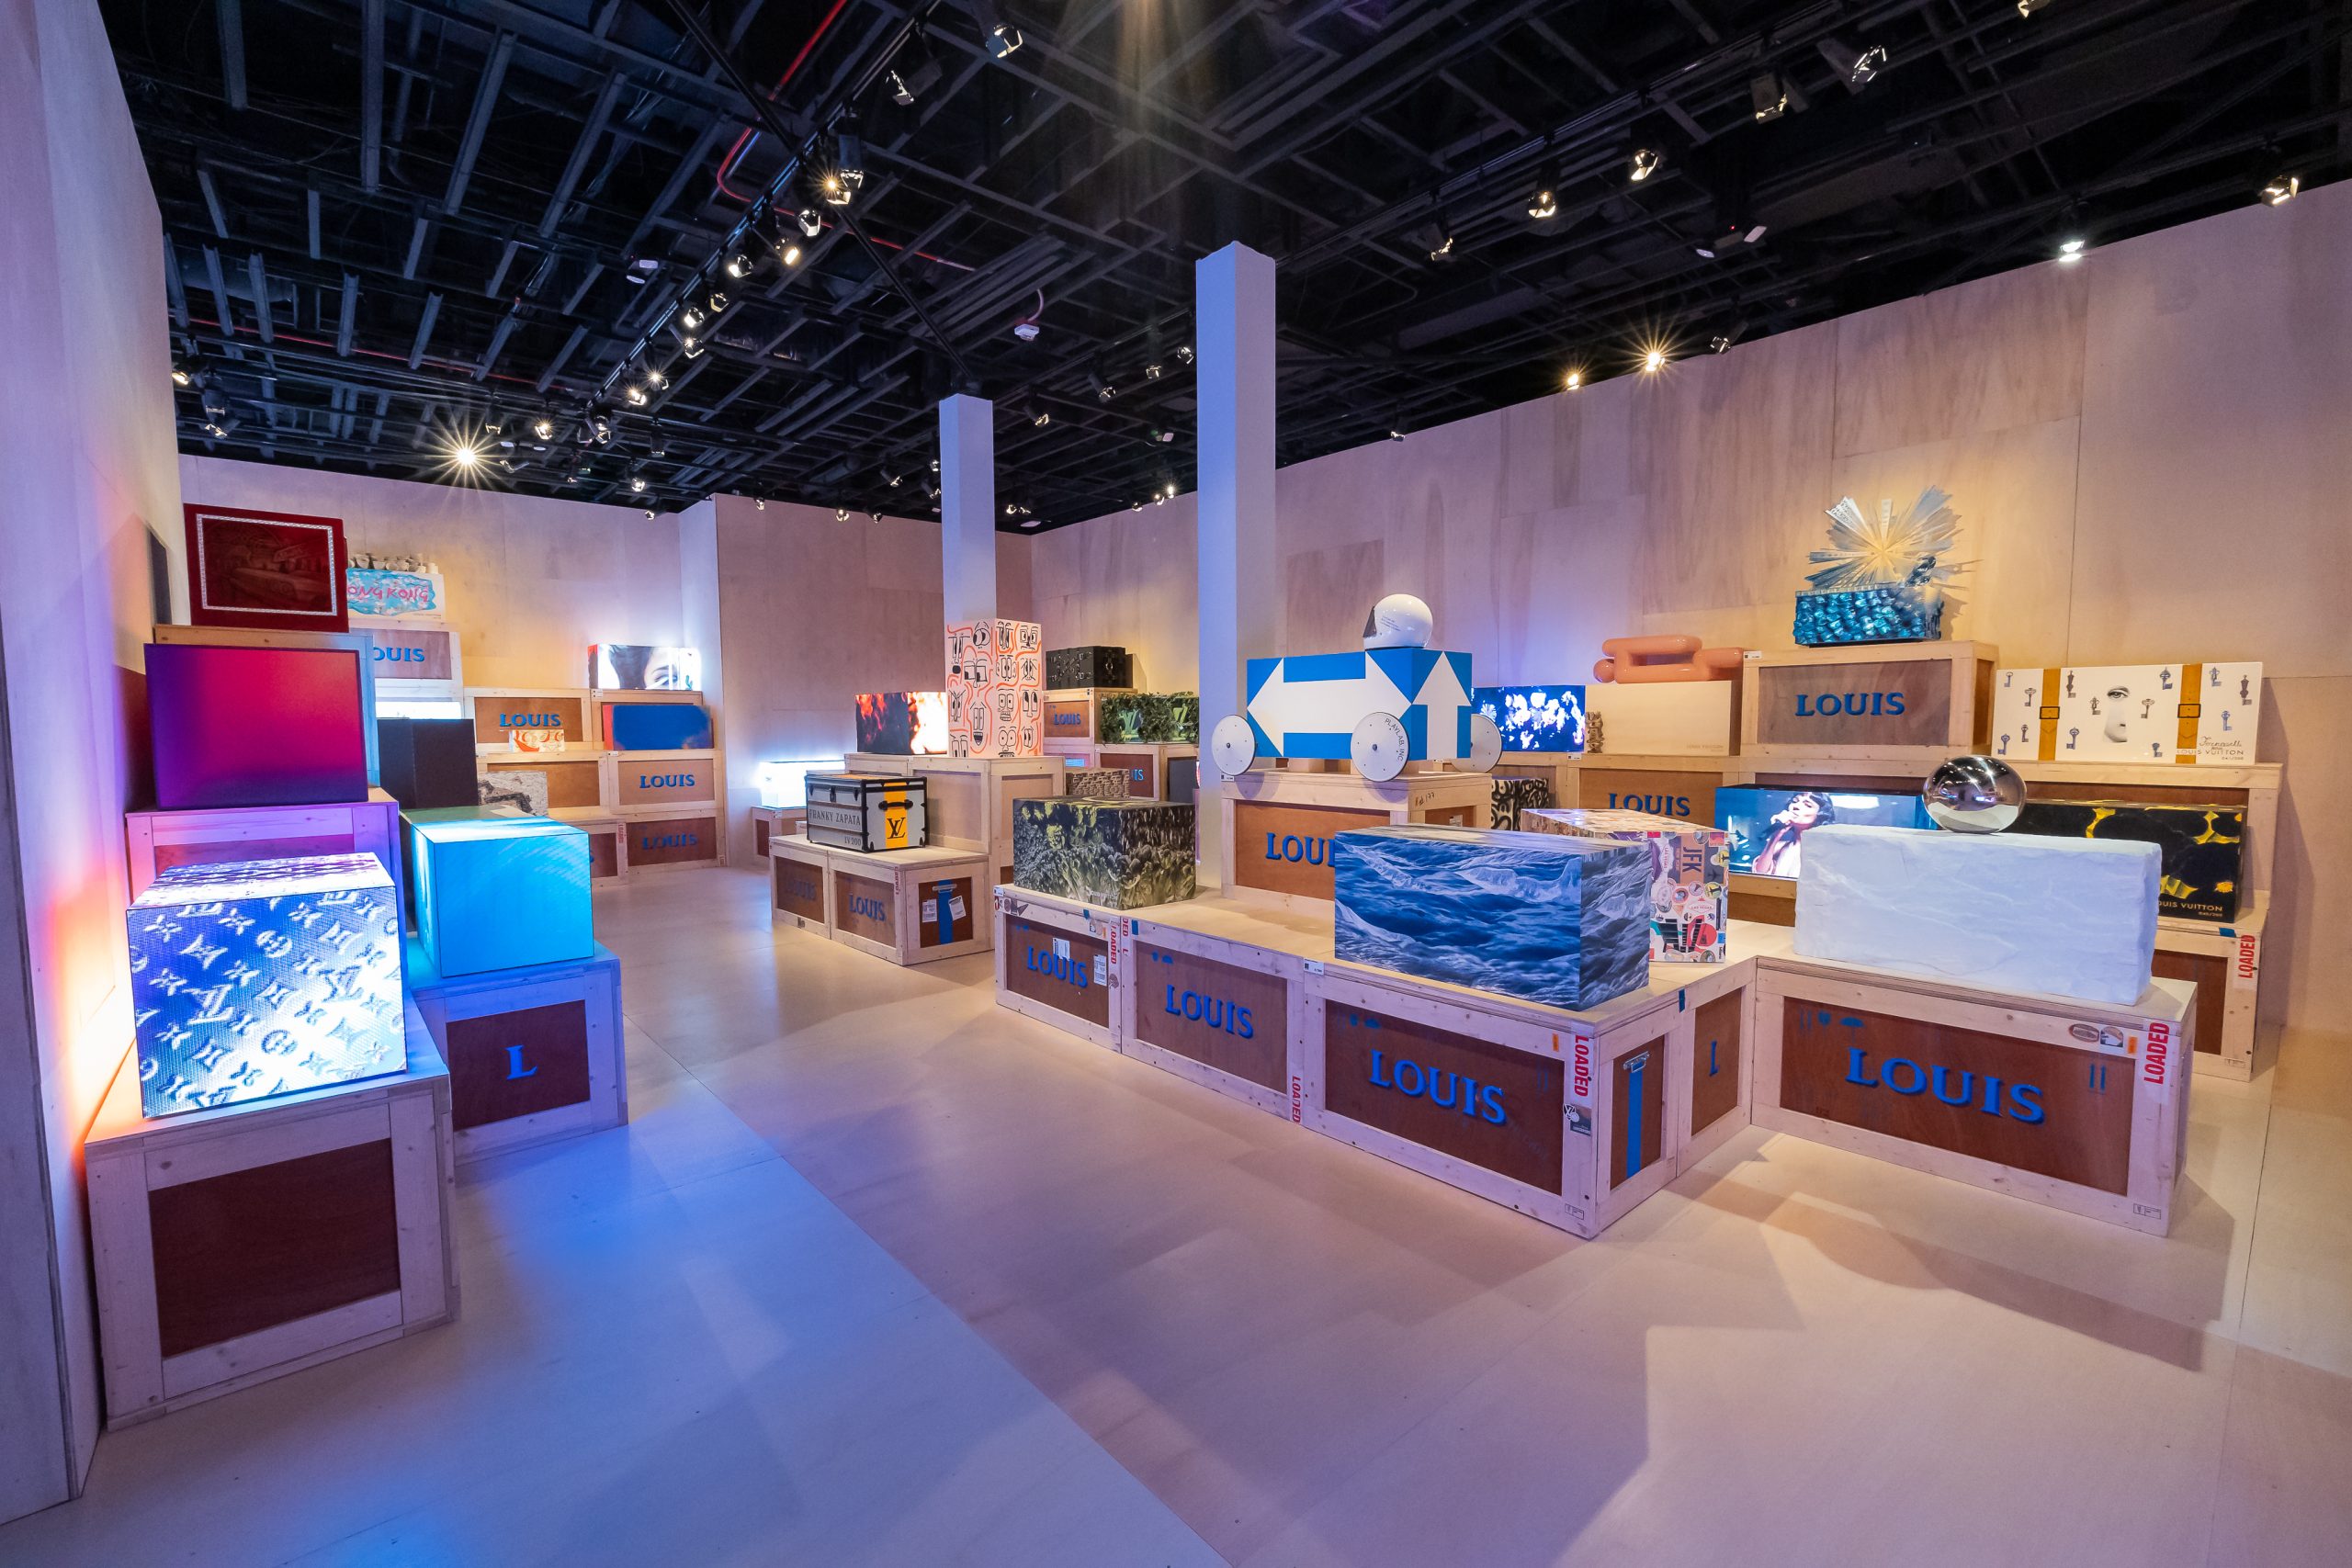 200 Trunks, 200 Visionaries – the marketing transmedia of Luis Vuitton